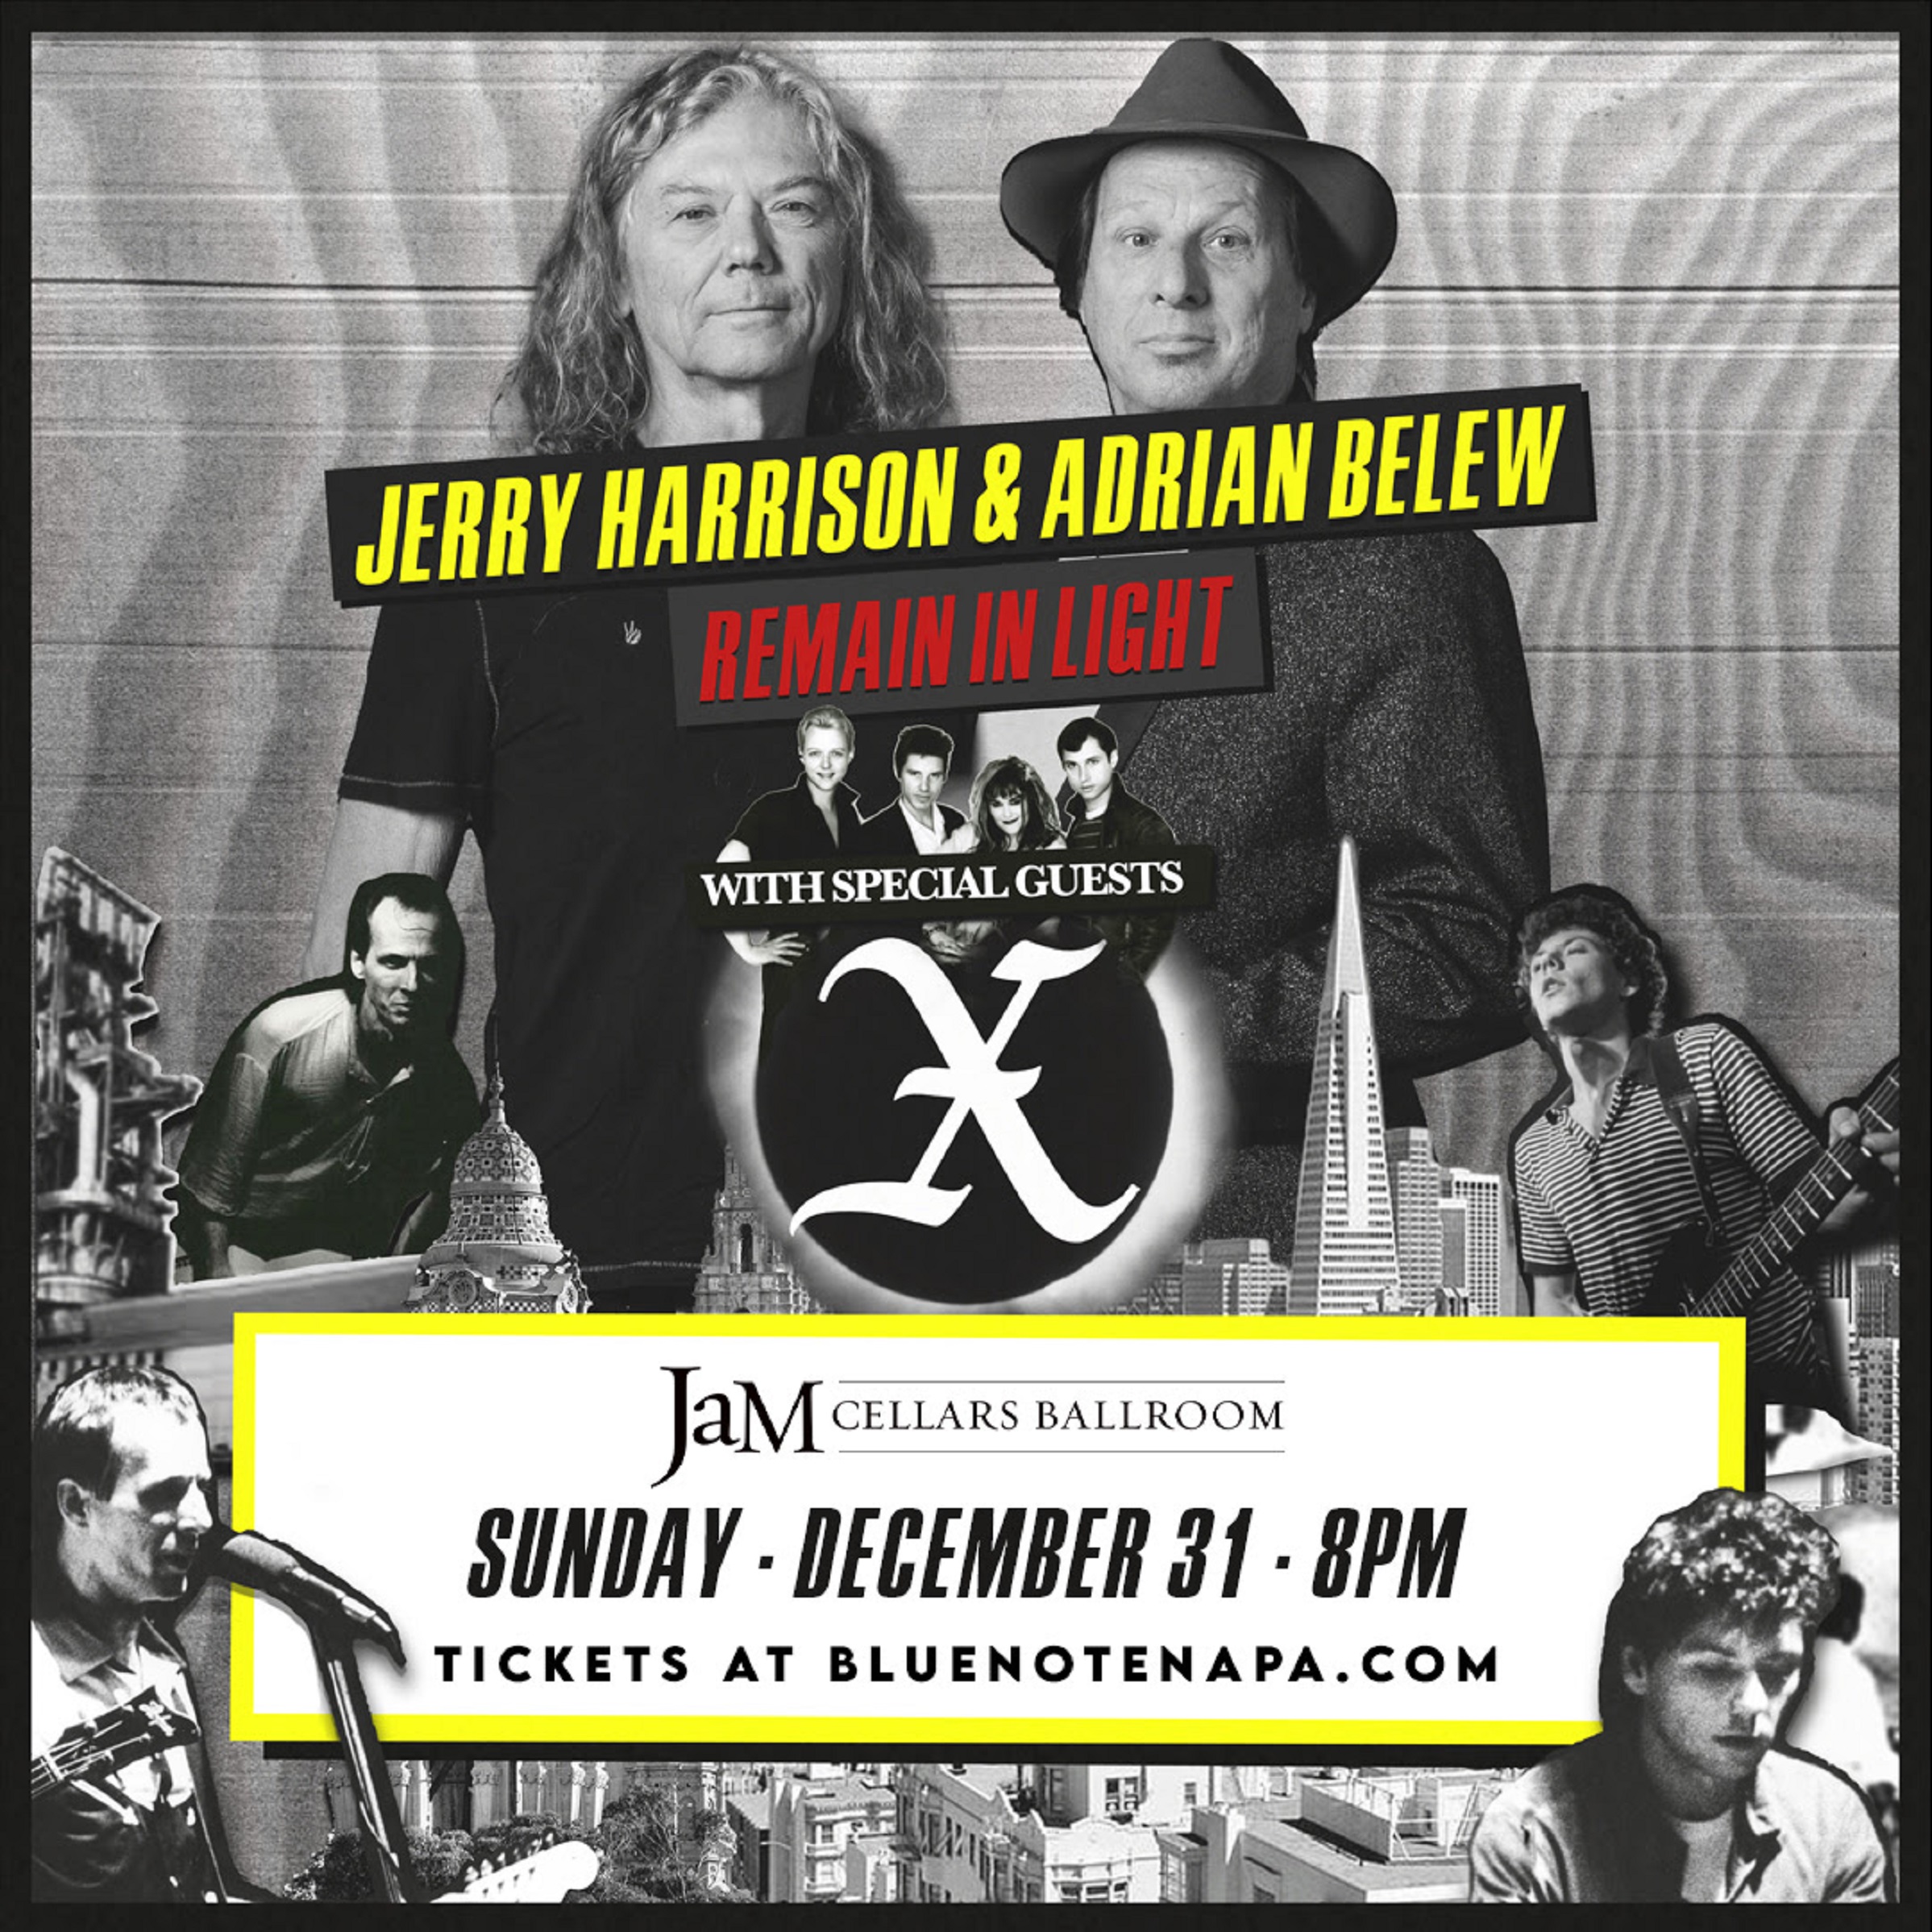 Celebrate New Year's Eve at JaM Cellars Ballroom and experience Jerry Harrison & Adrian Belew: REMAIN IN LIGHT